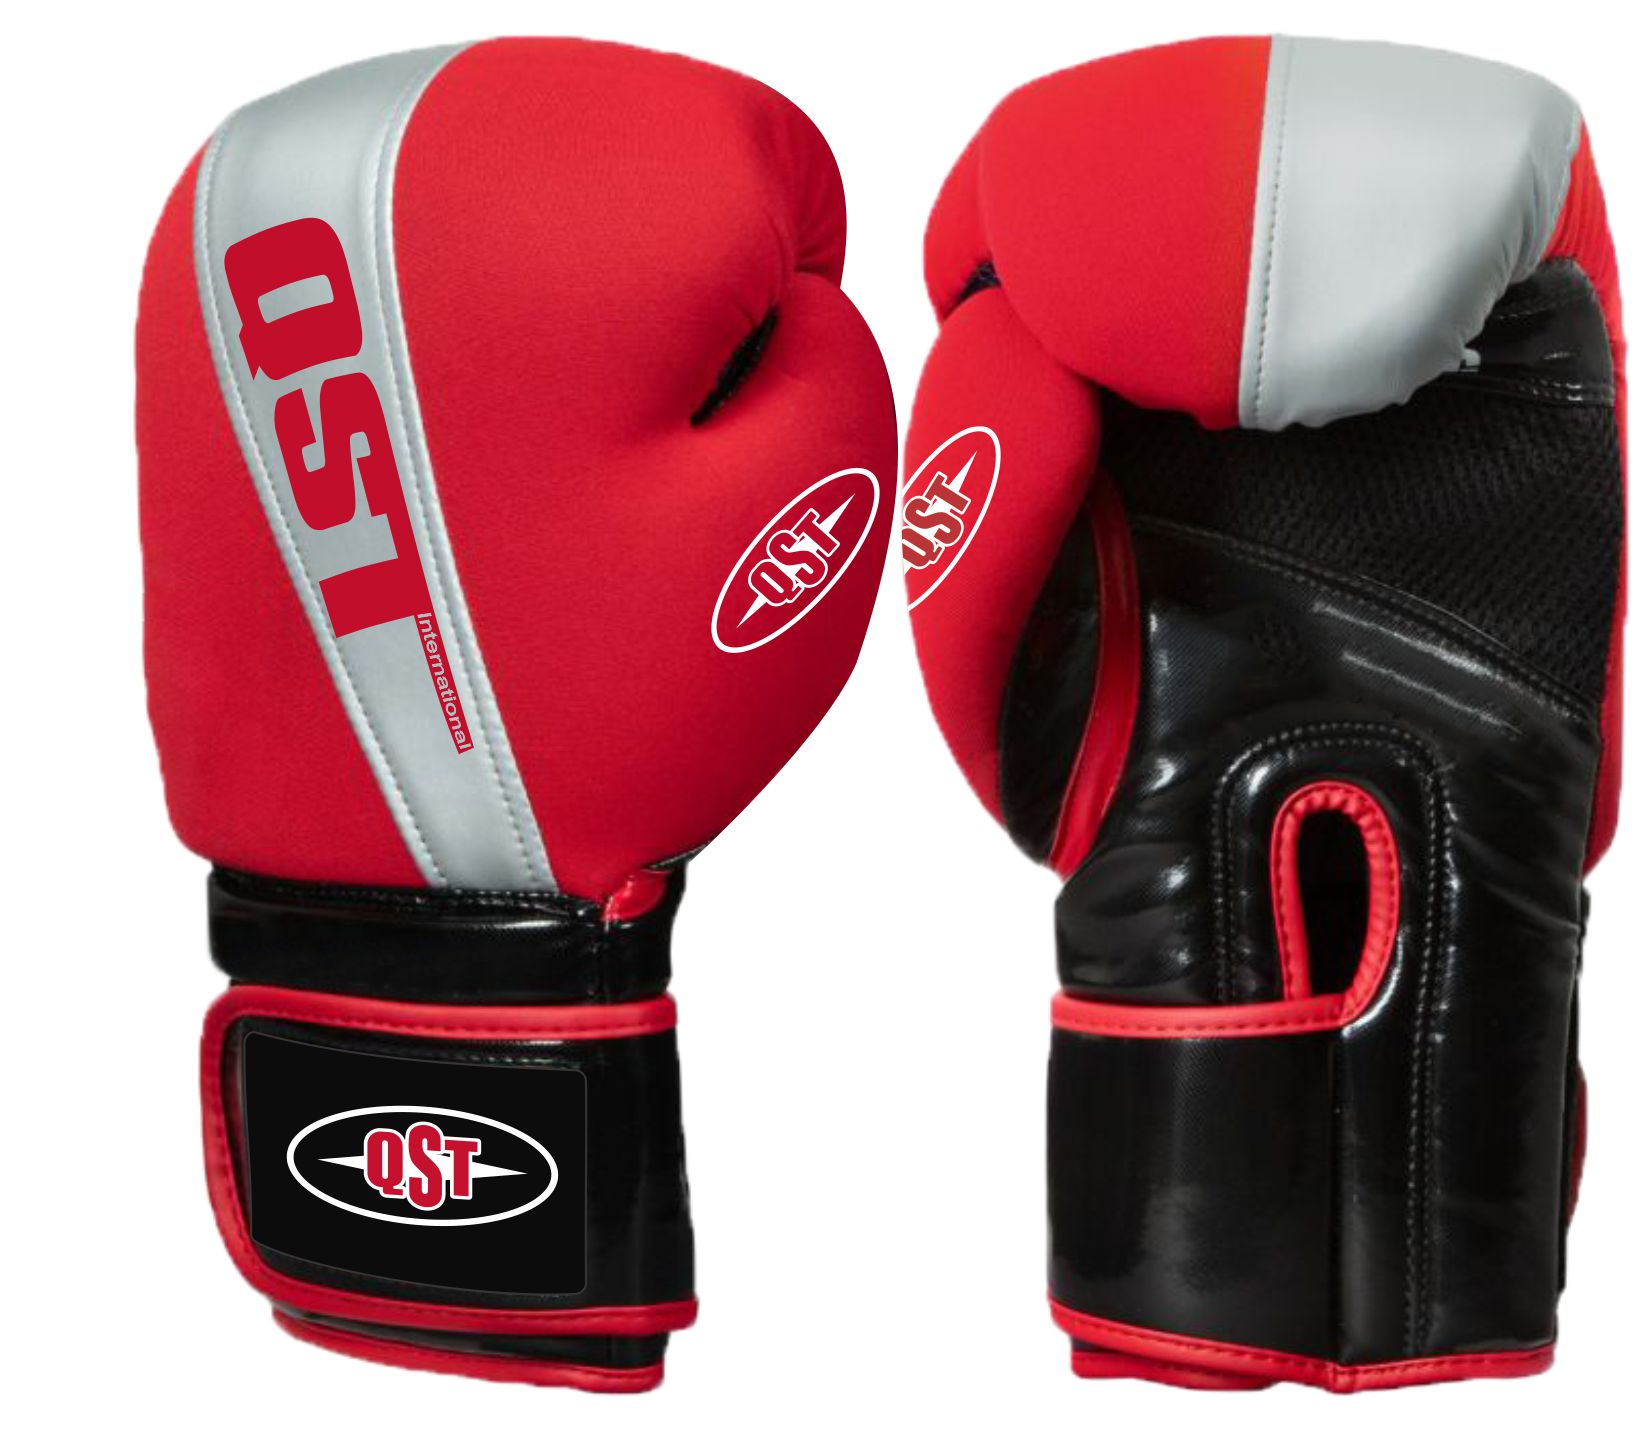 Professional Boxing Gloves - PRG-1512